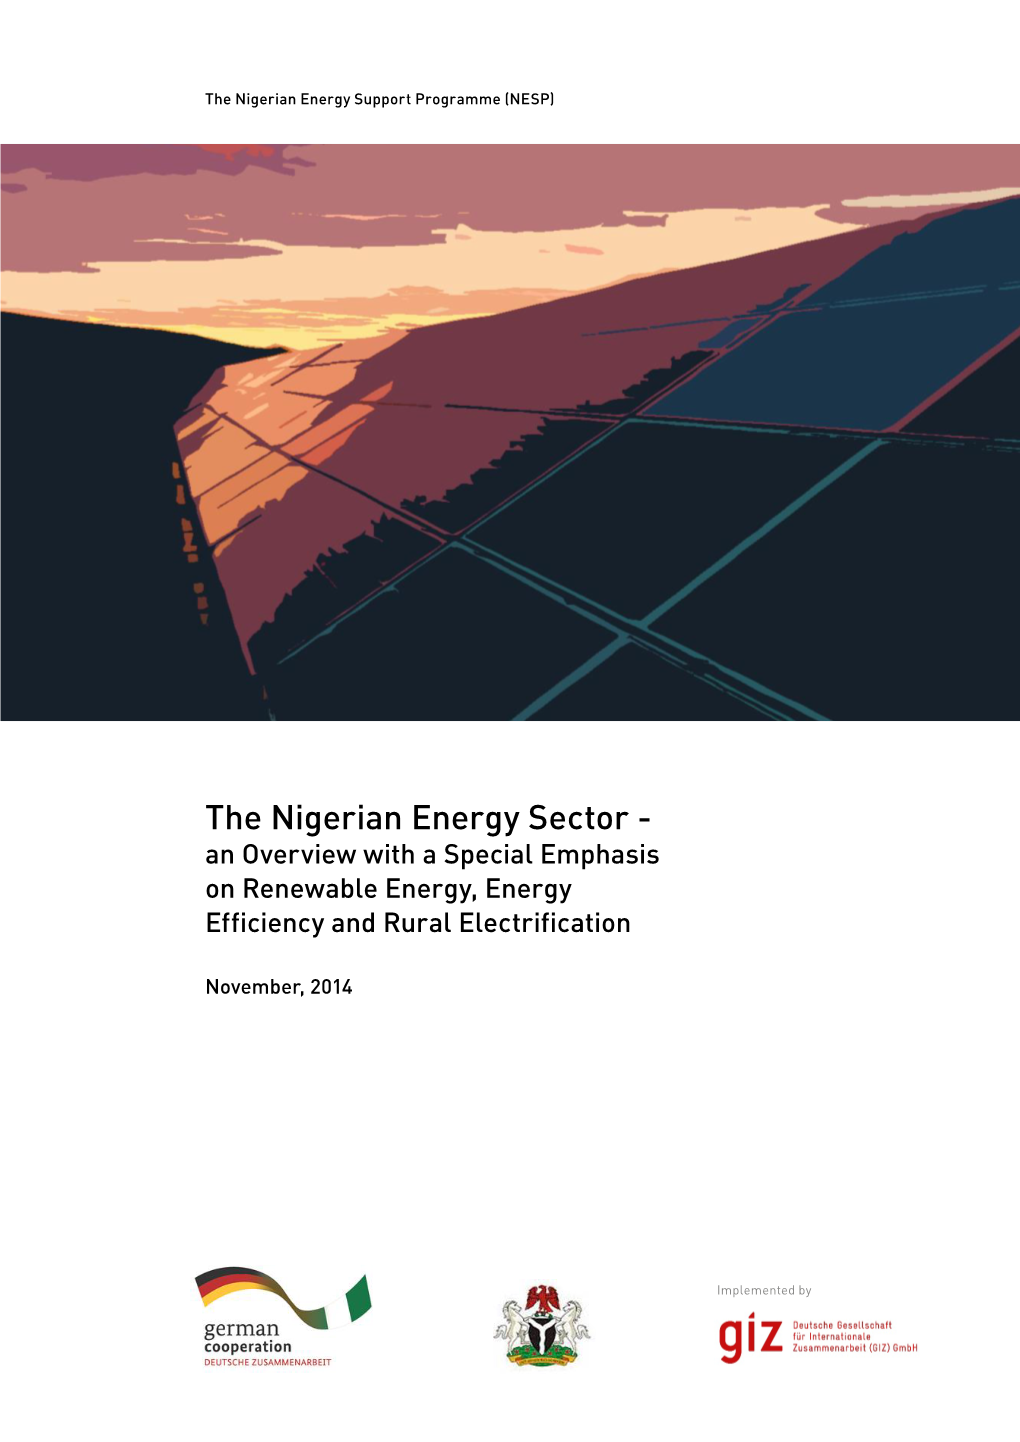 The Nigerian Energy Sector